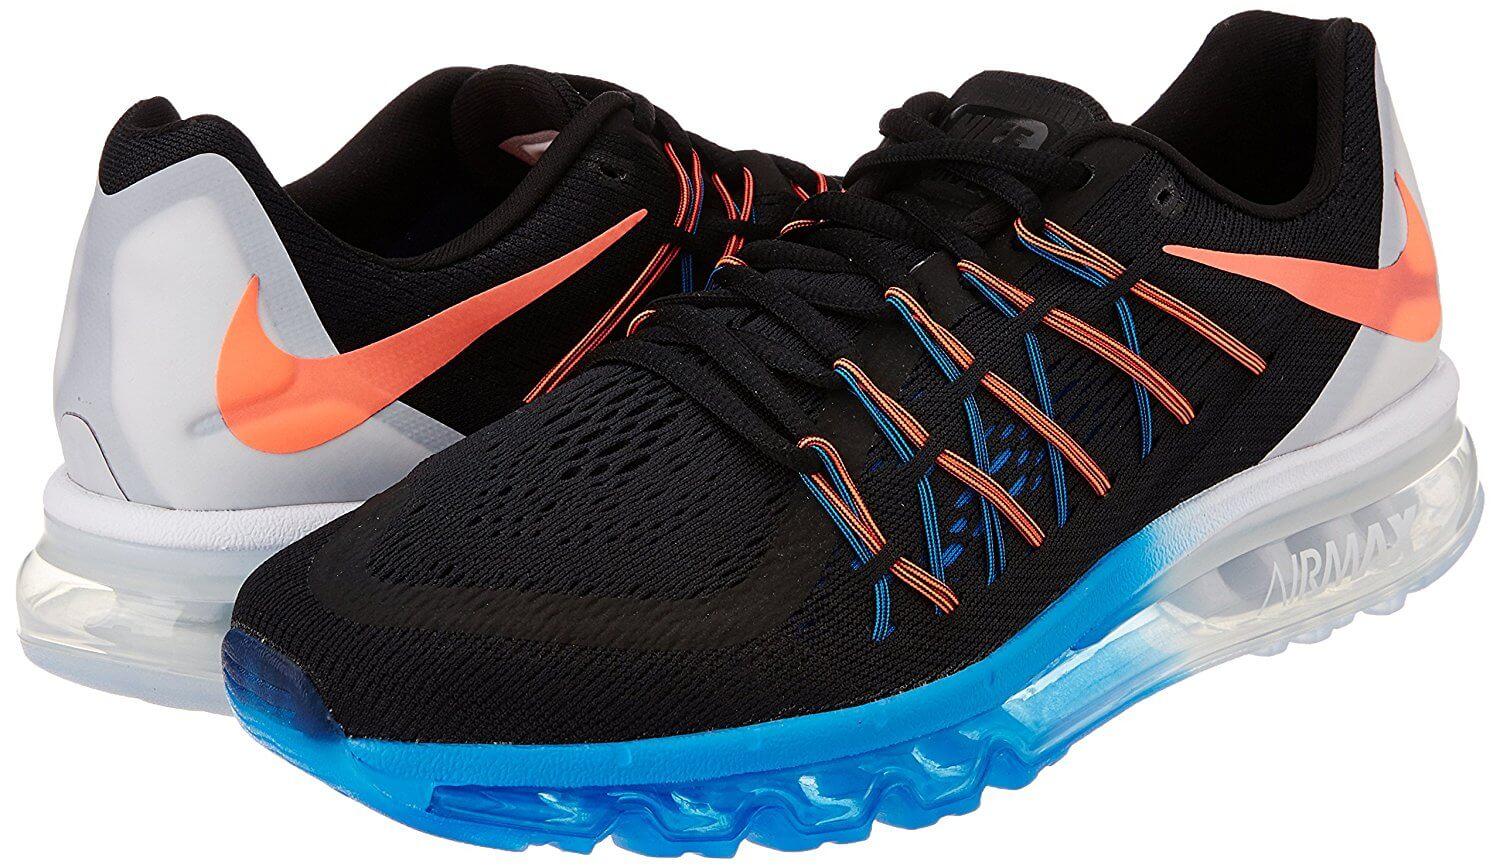 Though on the pricey end, the Nike Air Max 2015 is a quality shoe.